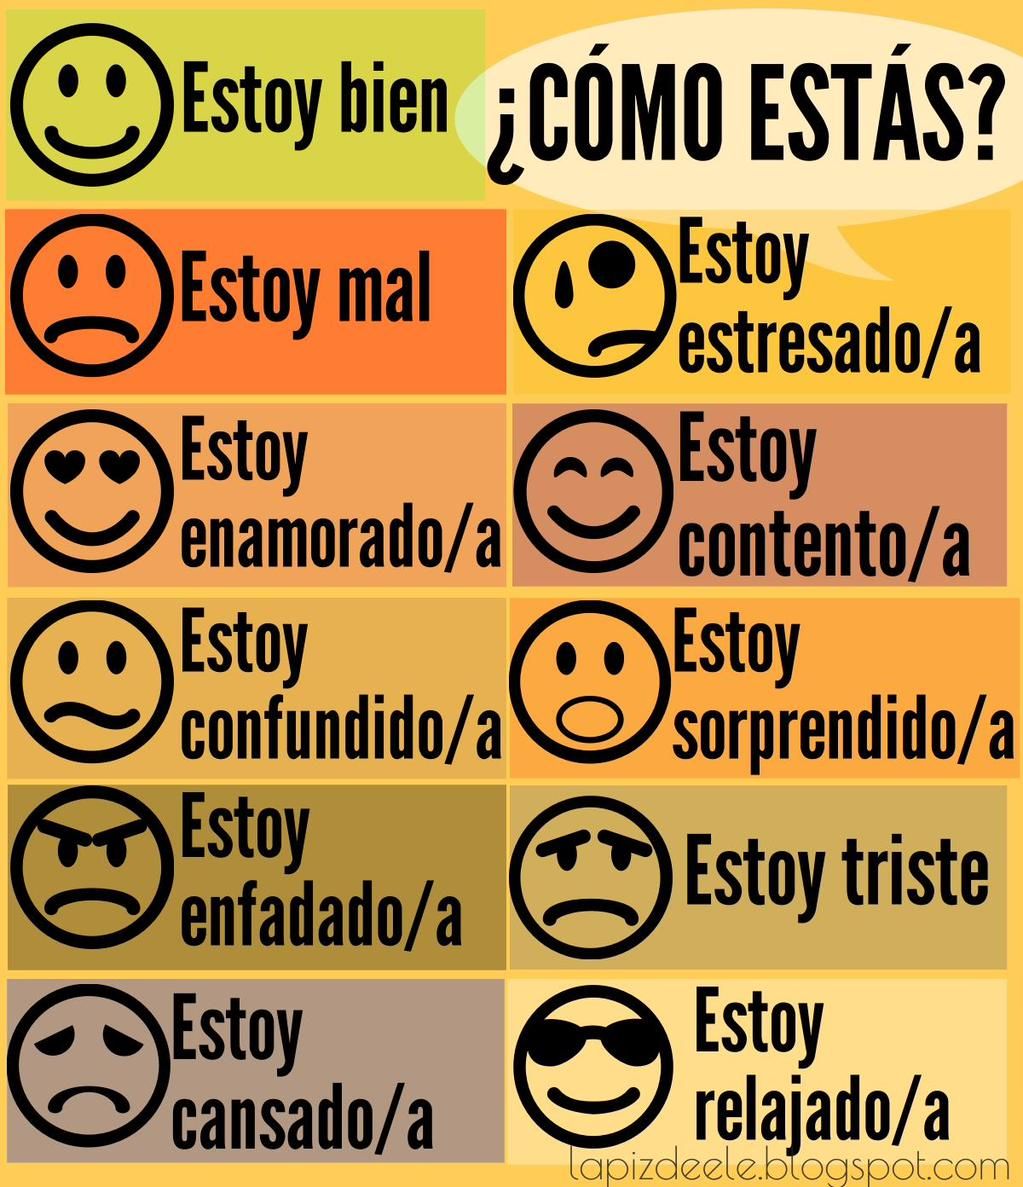 8 SYNONYMS FOR SAD IN SPANISH 1- Triste 2- Sensible 3- Mal 4